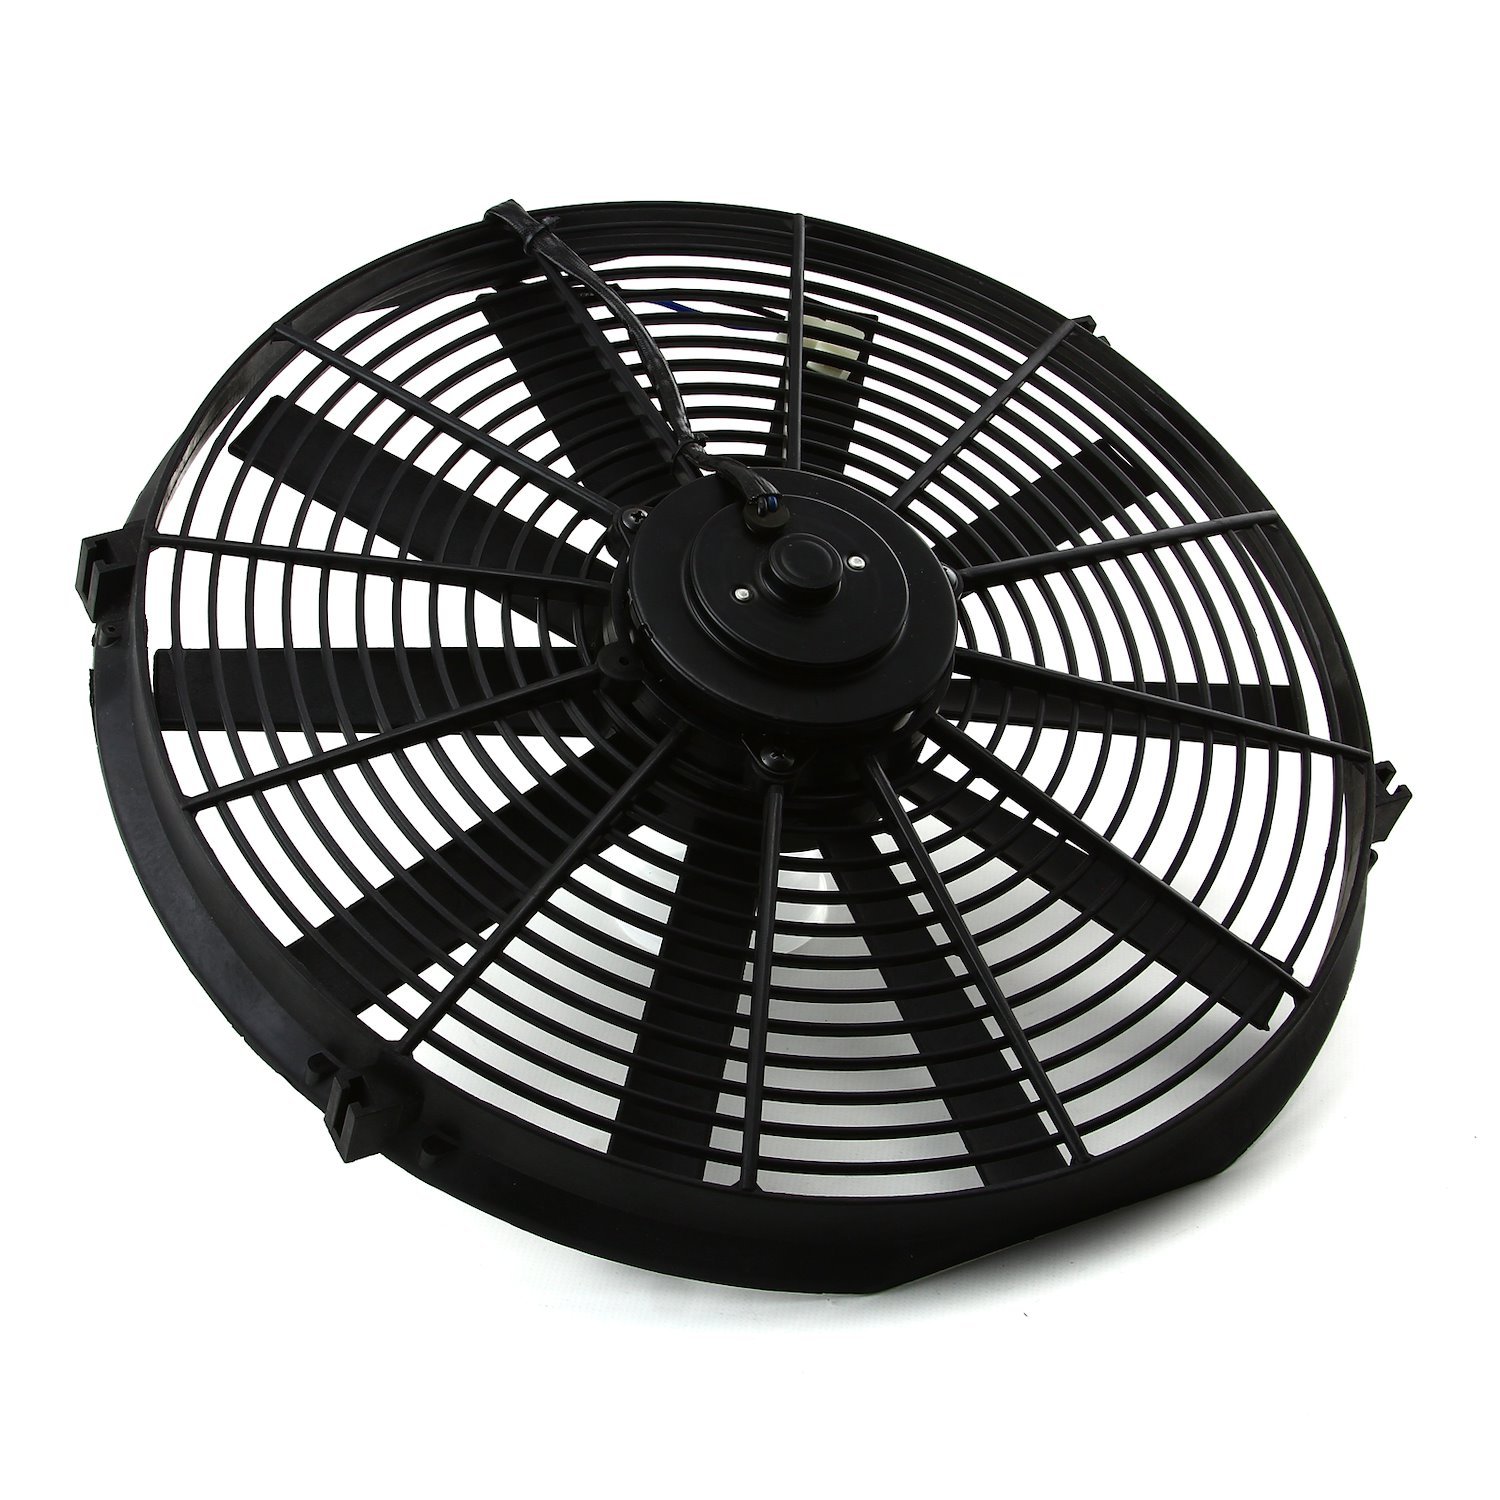 16" Straight Blade Electric Fan Height: 16.5"